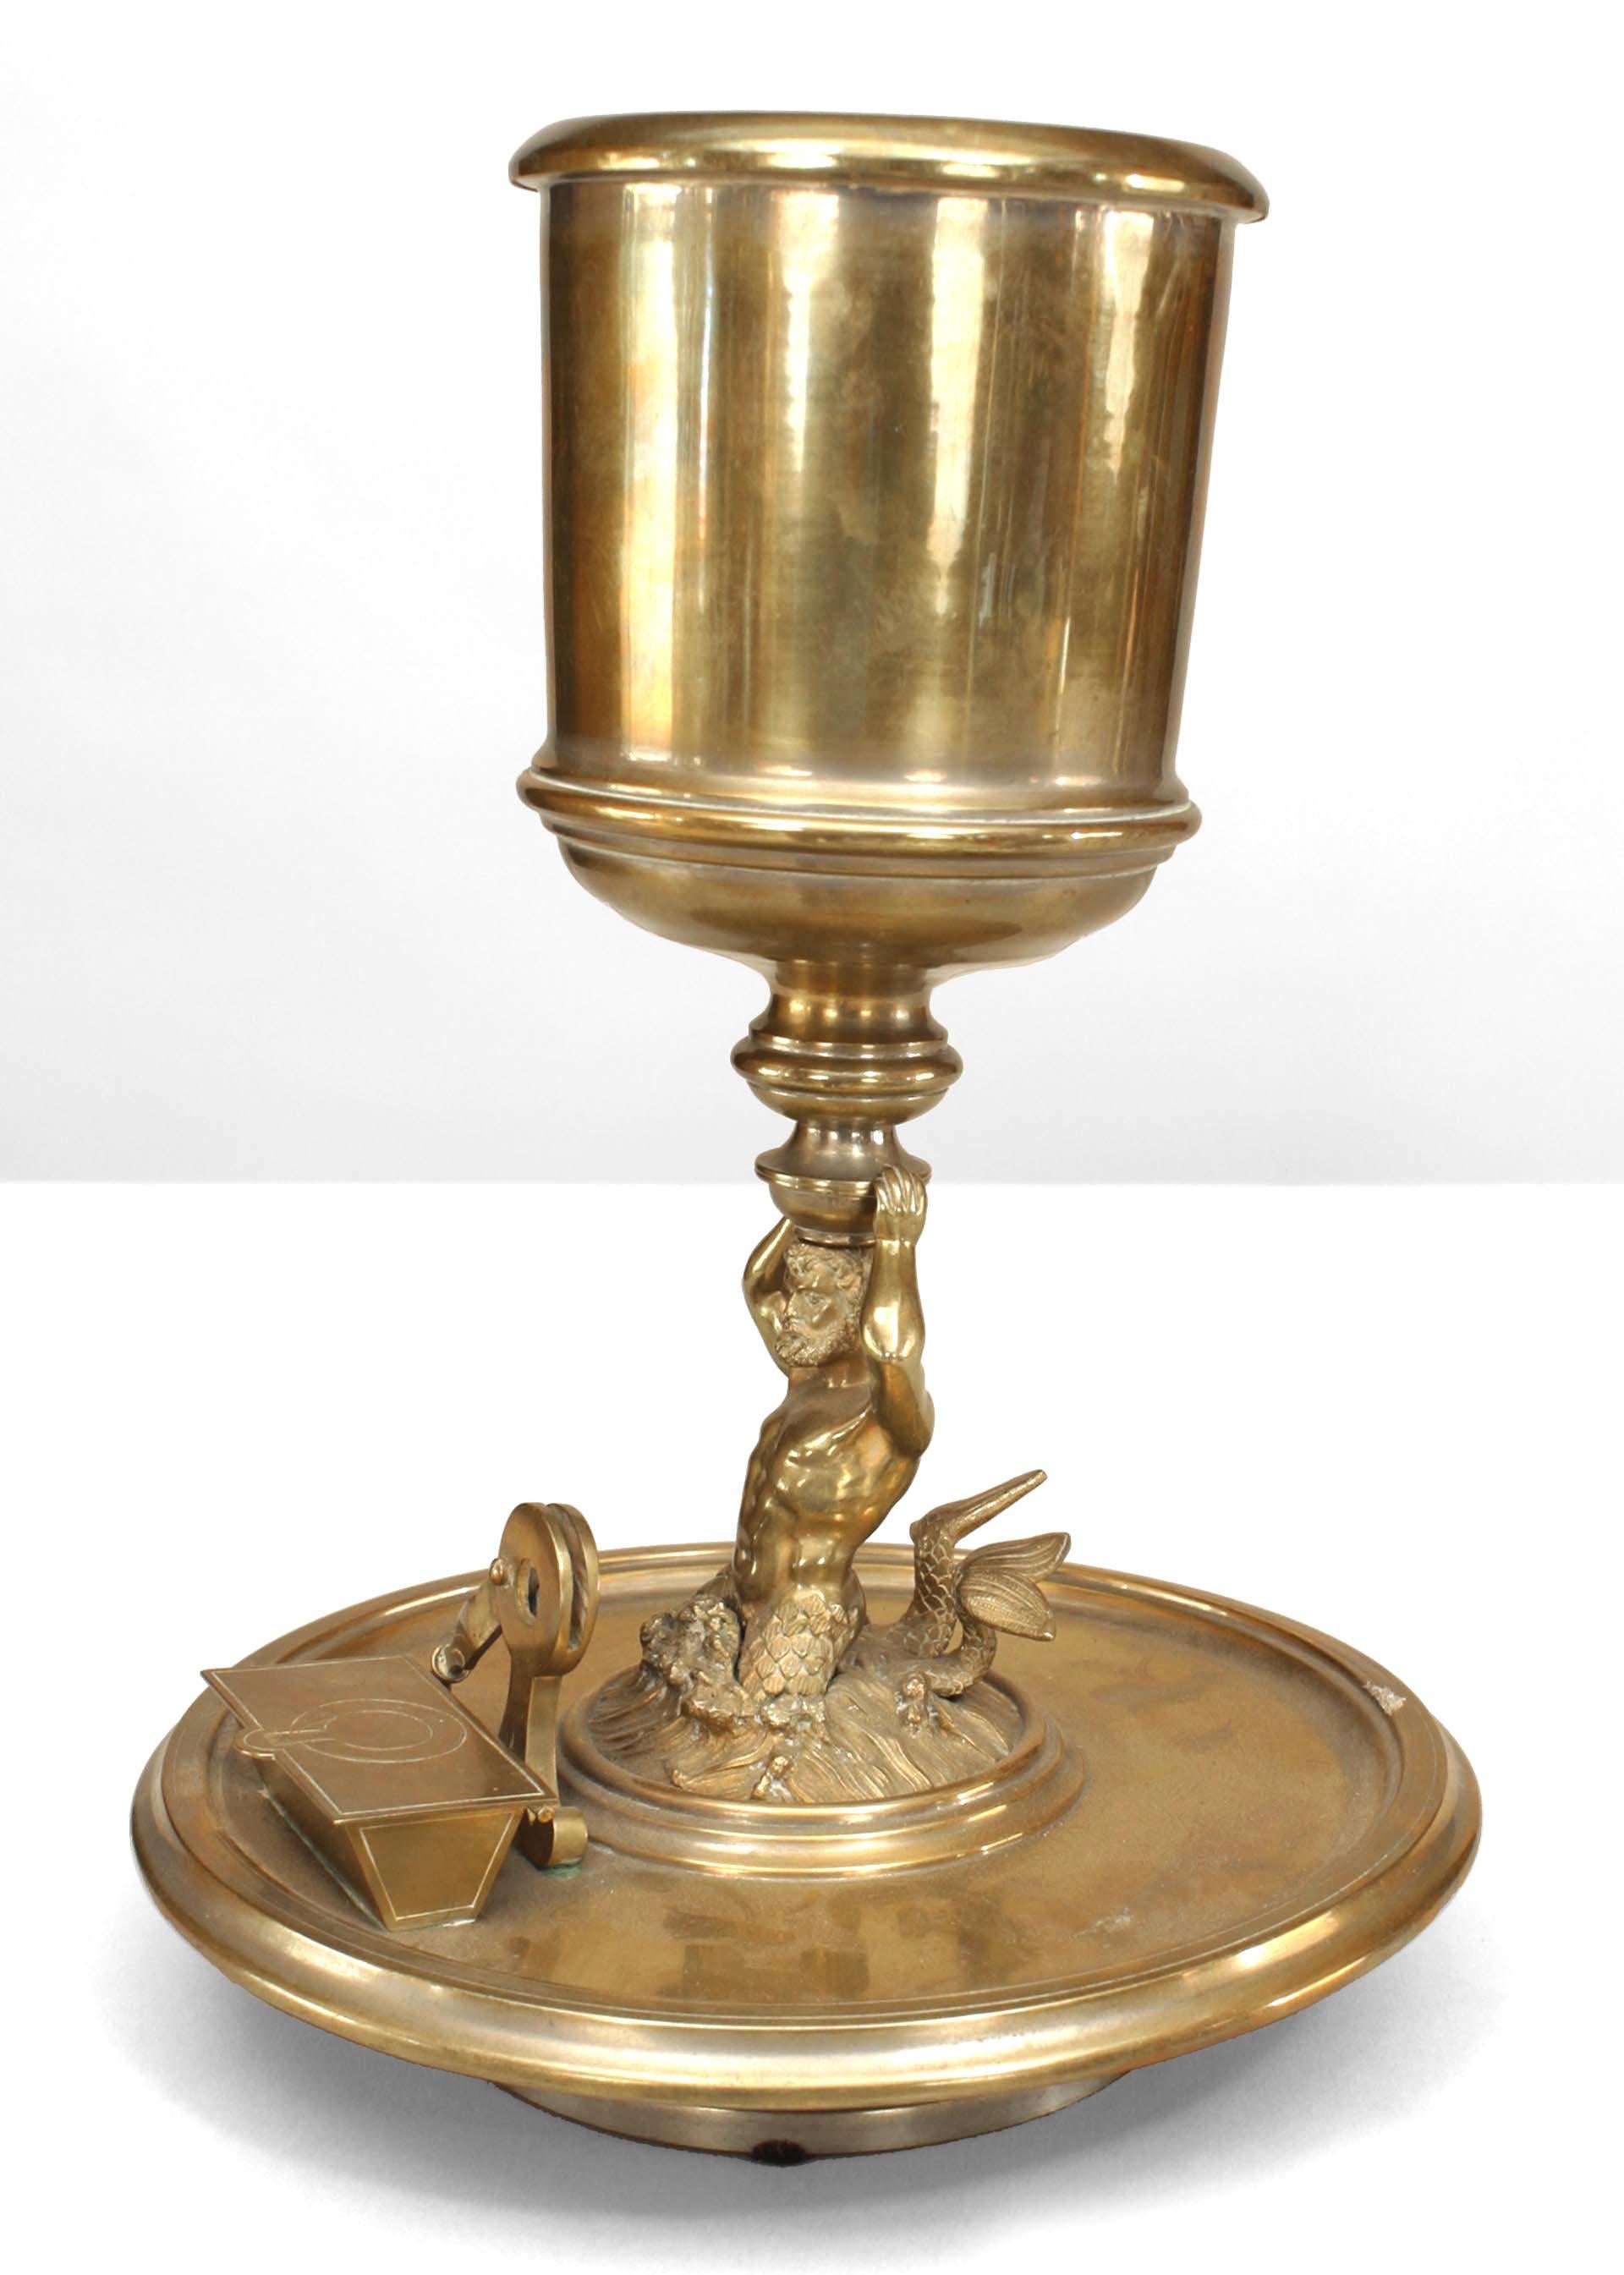 English Victorian bronze humidor with vase top supported by figure of Neptune on round shaped base.
